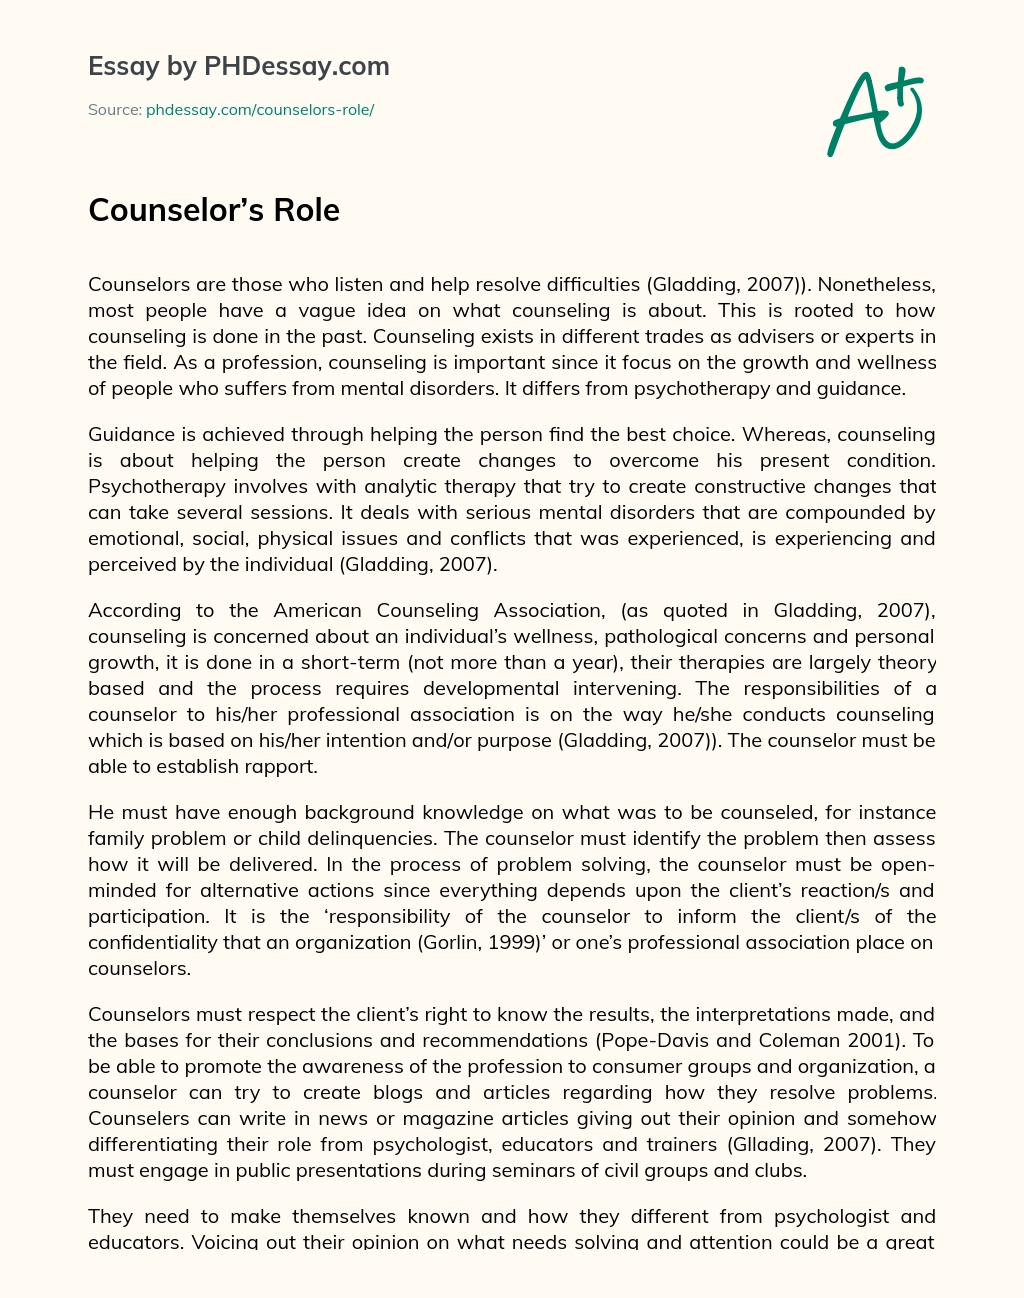 Counselor’s Role essay